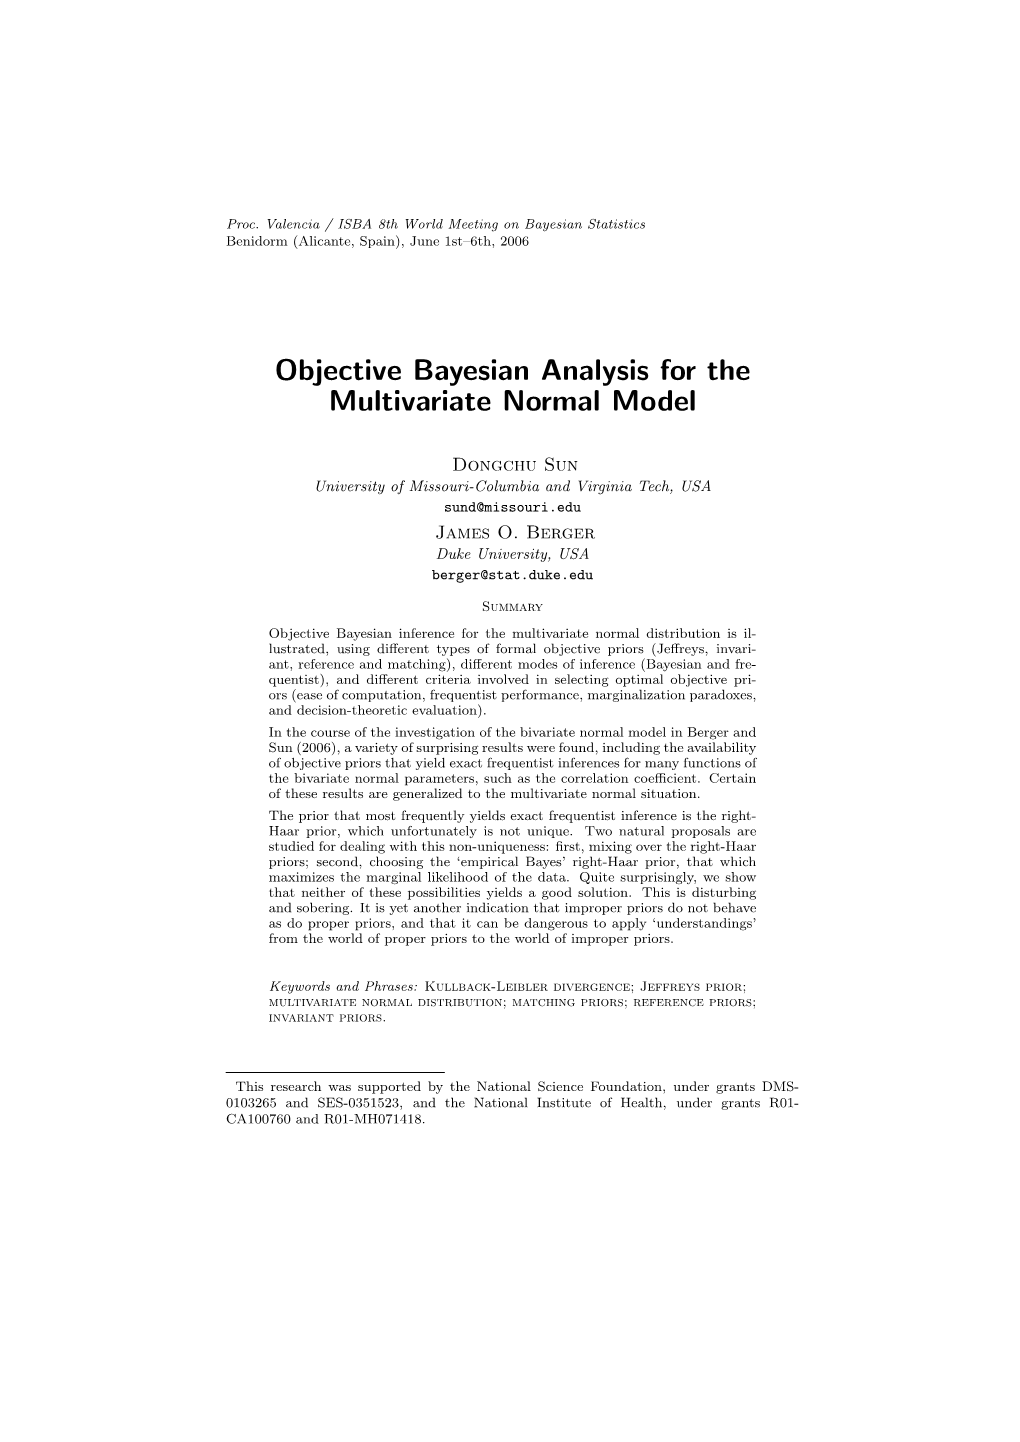 Objective Bayesian Analysis for the Multivariate Normal Model